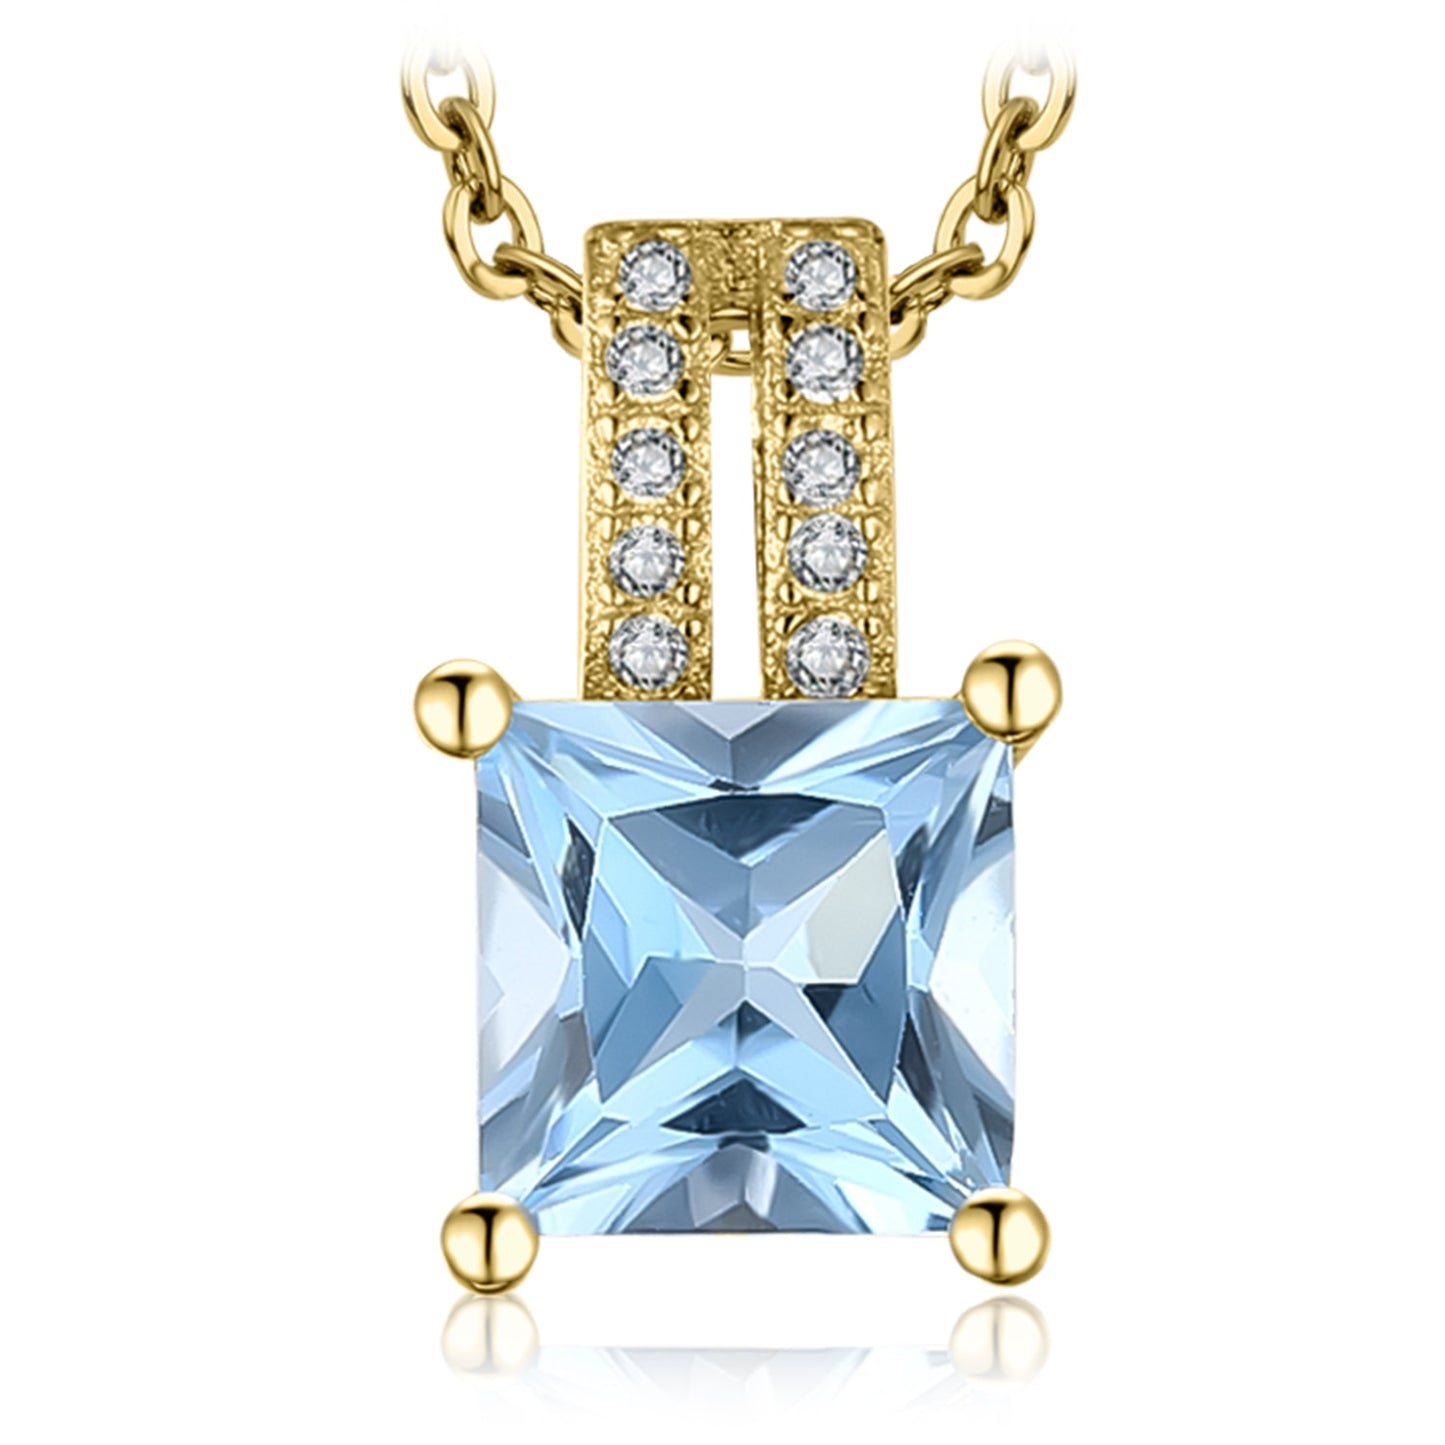 JewelryPalace 1.2ct Princess Cut Blue Topaz 925 Sterling Silver Pendant Necklace for Woman No Chain Yellow Gold Rose Gold Plated